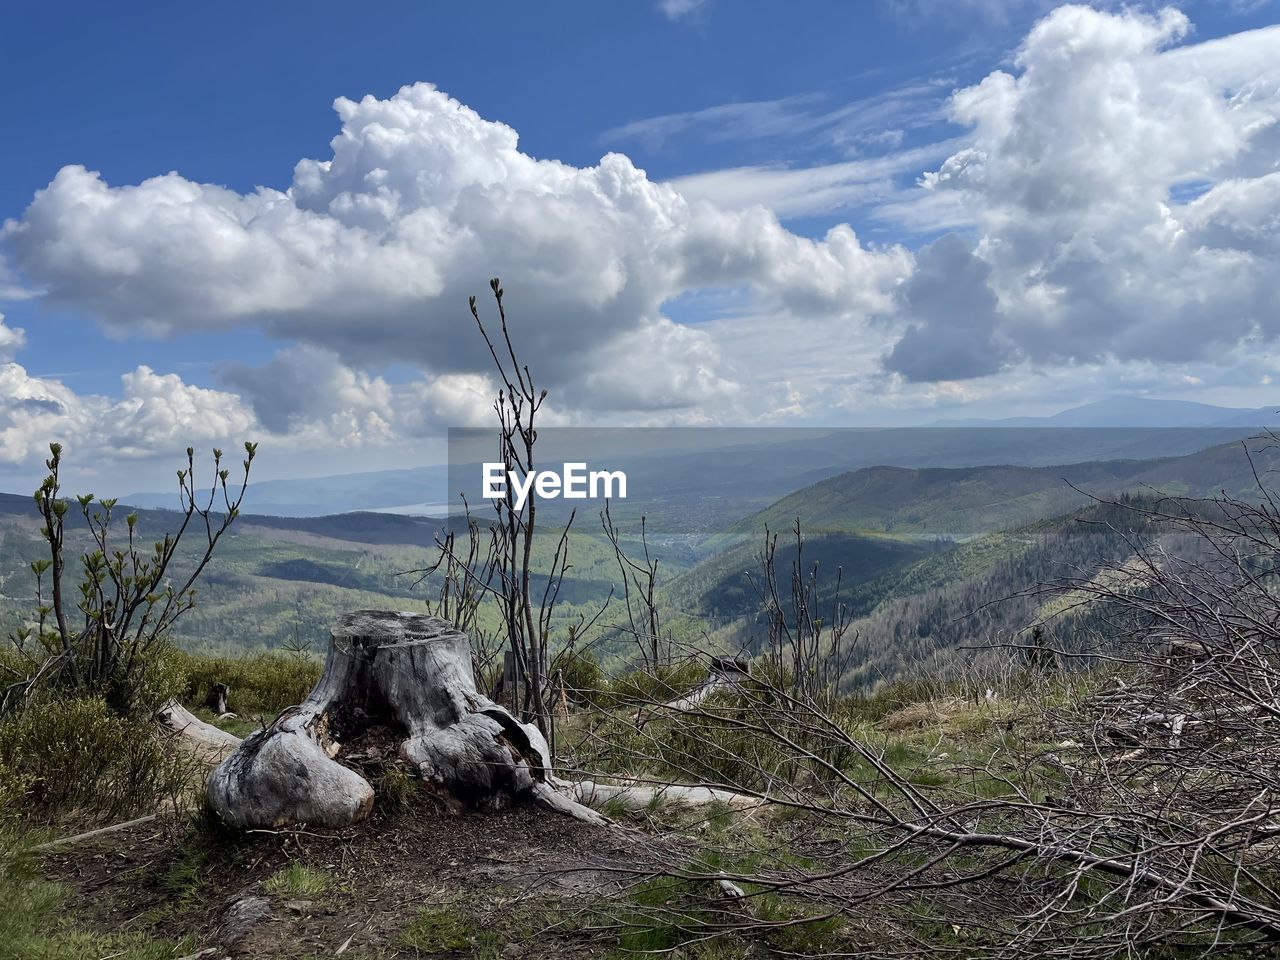 VIEW OF A HORSE ON MOUNTAIN AGAINST SKY